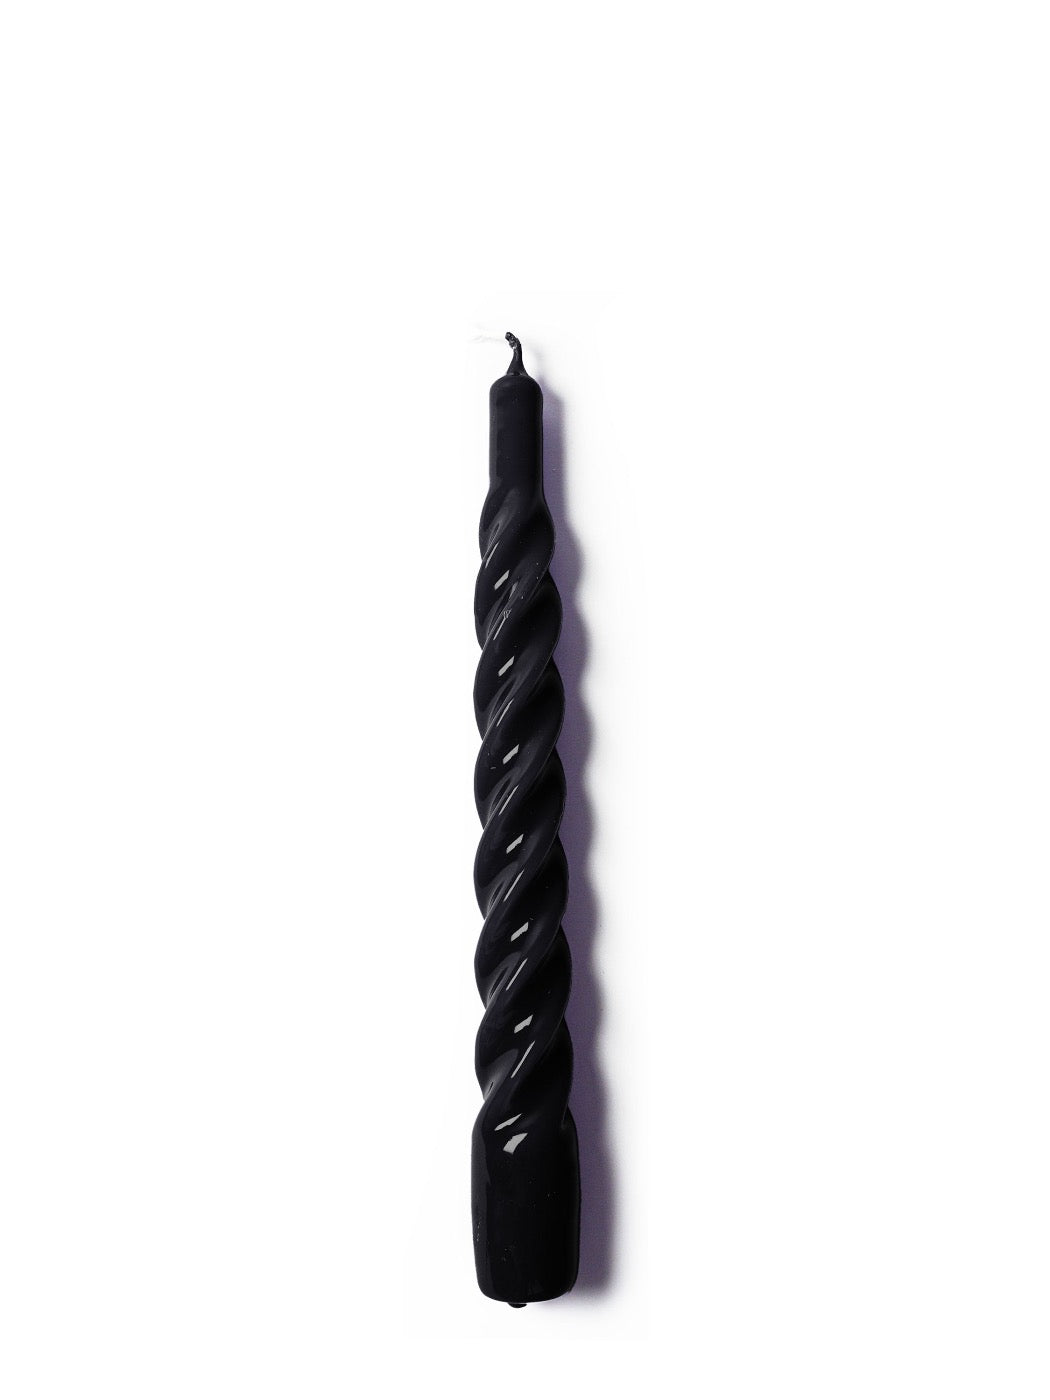 gloss black twisted candle by YOD&CO